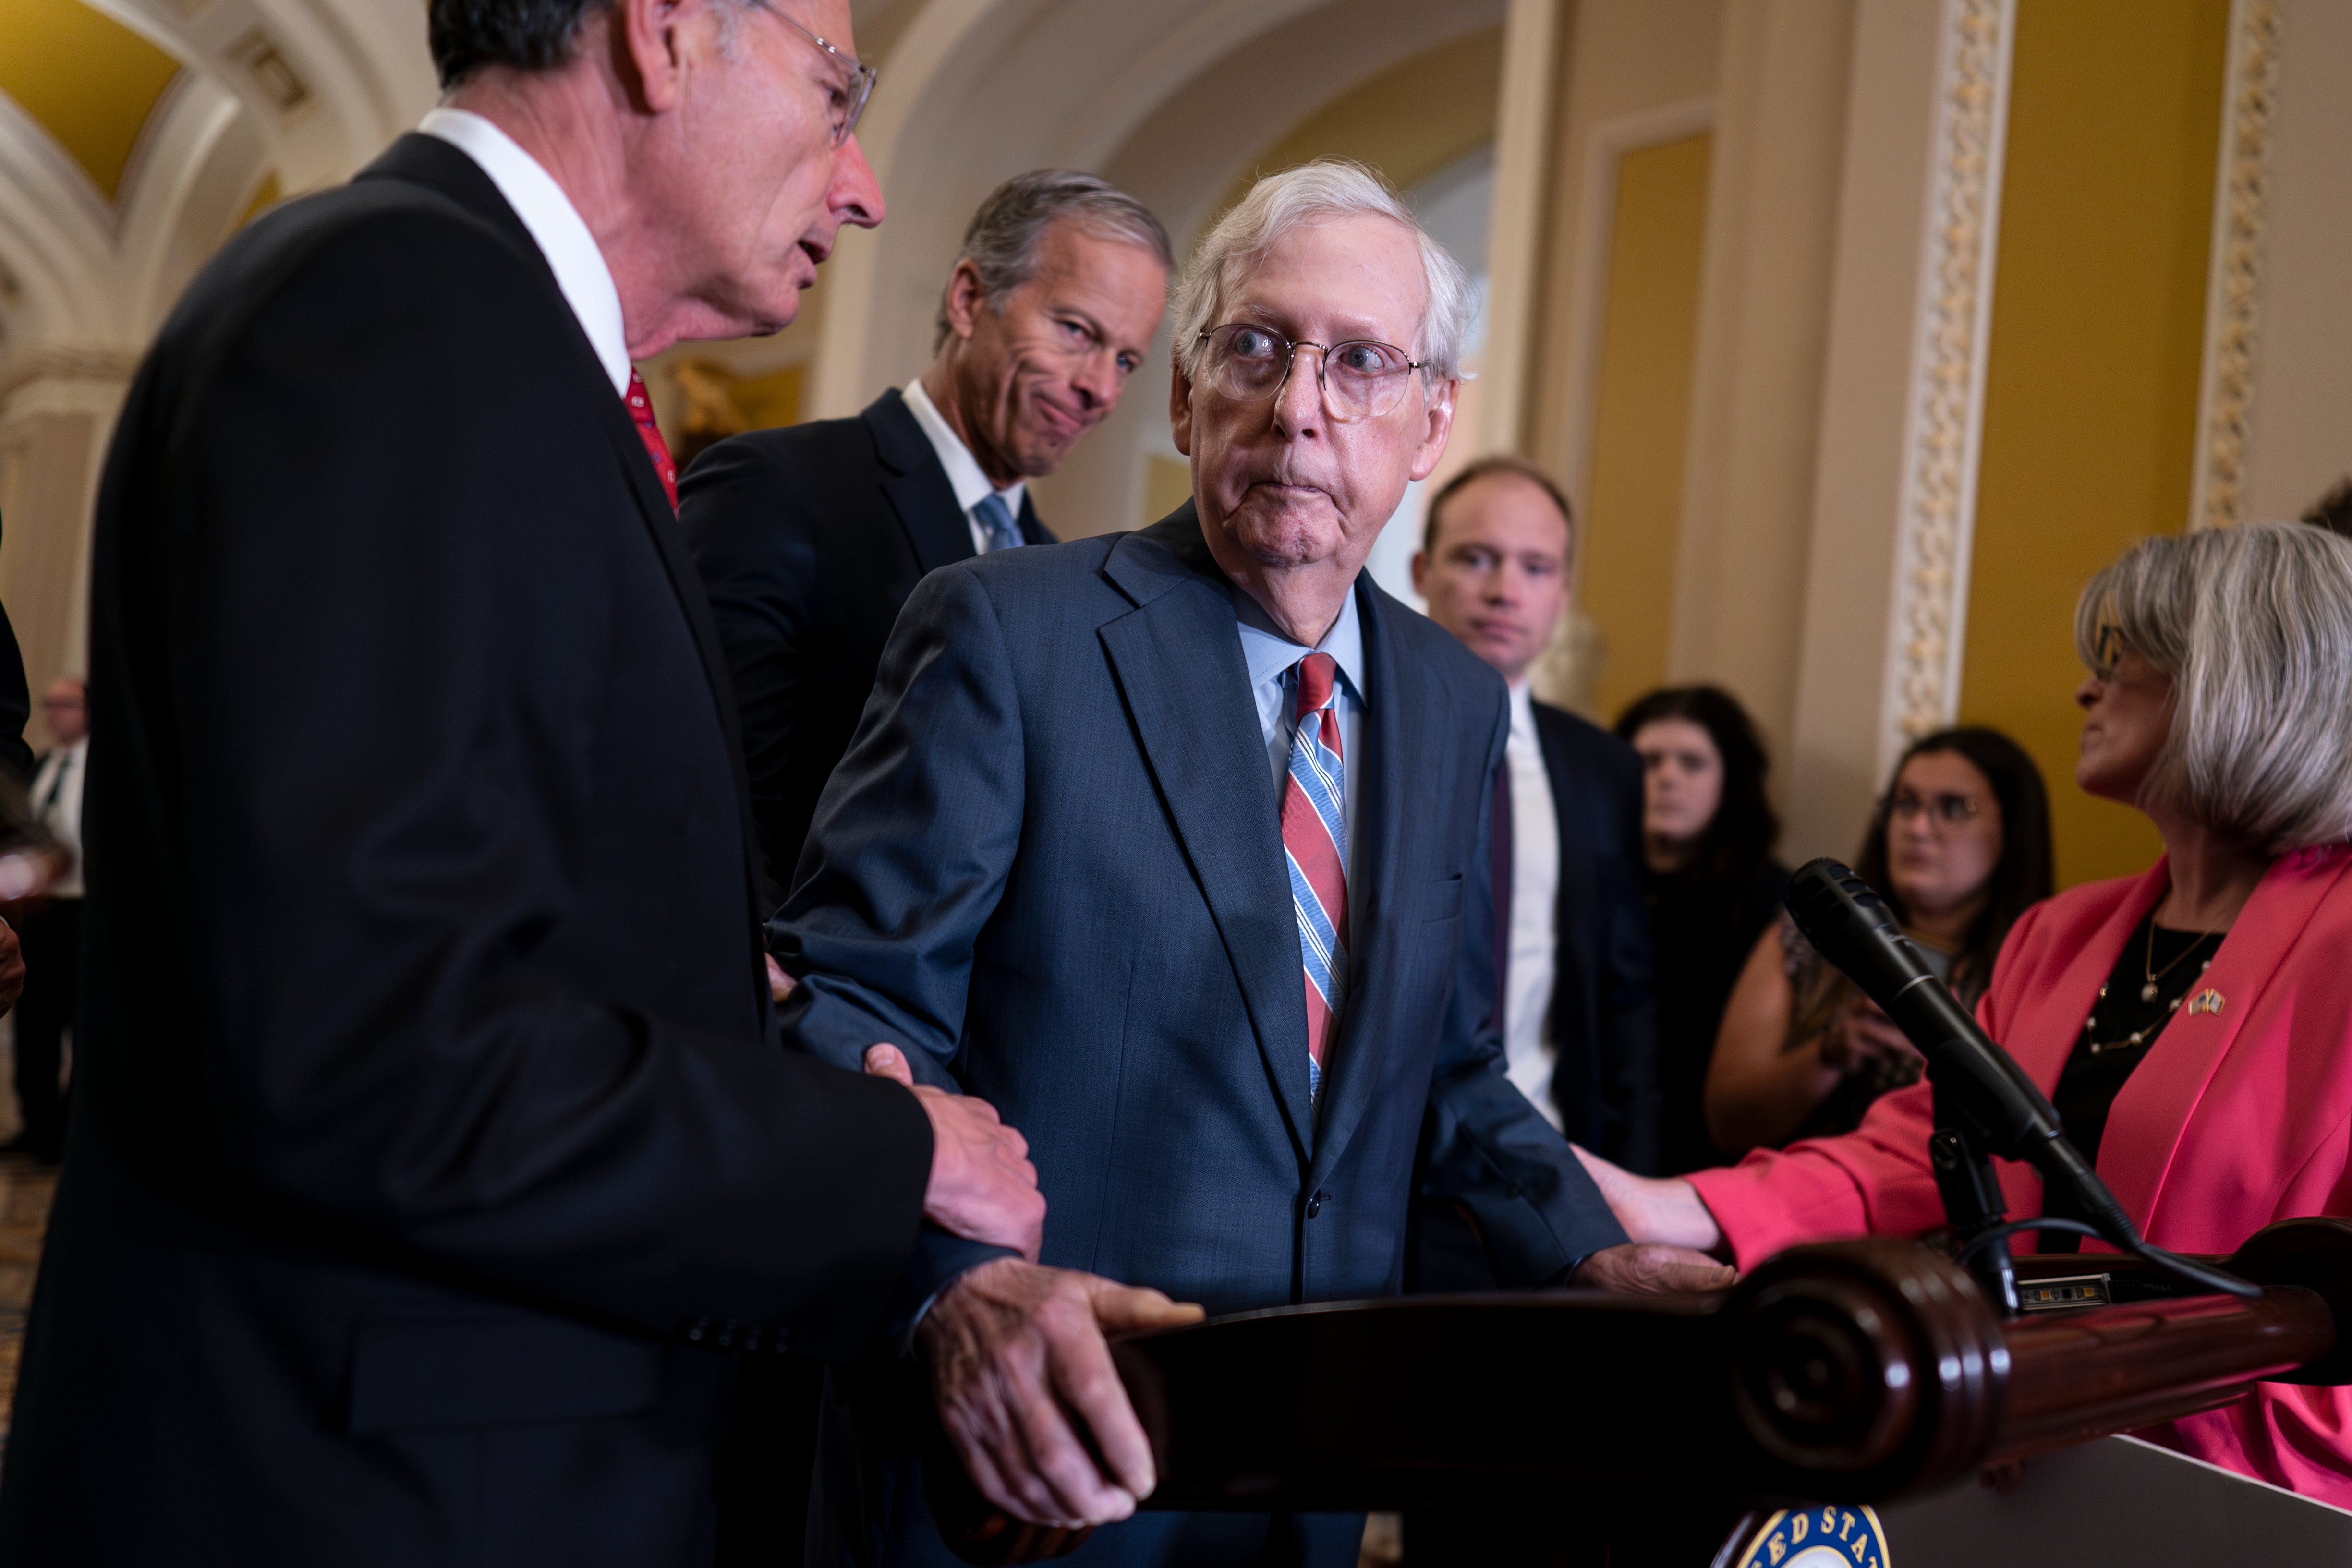 U.S. Senate Minority Leader Mitch McConnell, R-Ky., center, is helped by, from left, Sen. John Barrasso, R-Wyo., Sen. John Thune, R-S.D., and Sen. Joni Ernst, R-Iowa, after the 81-year-old GOP leader froze at the microphones as he arrived for a news conference